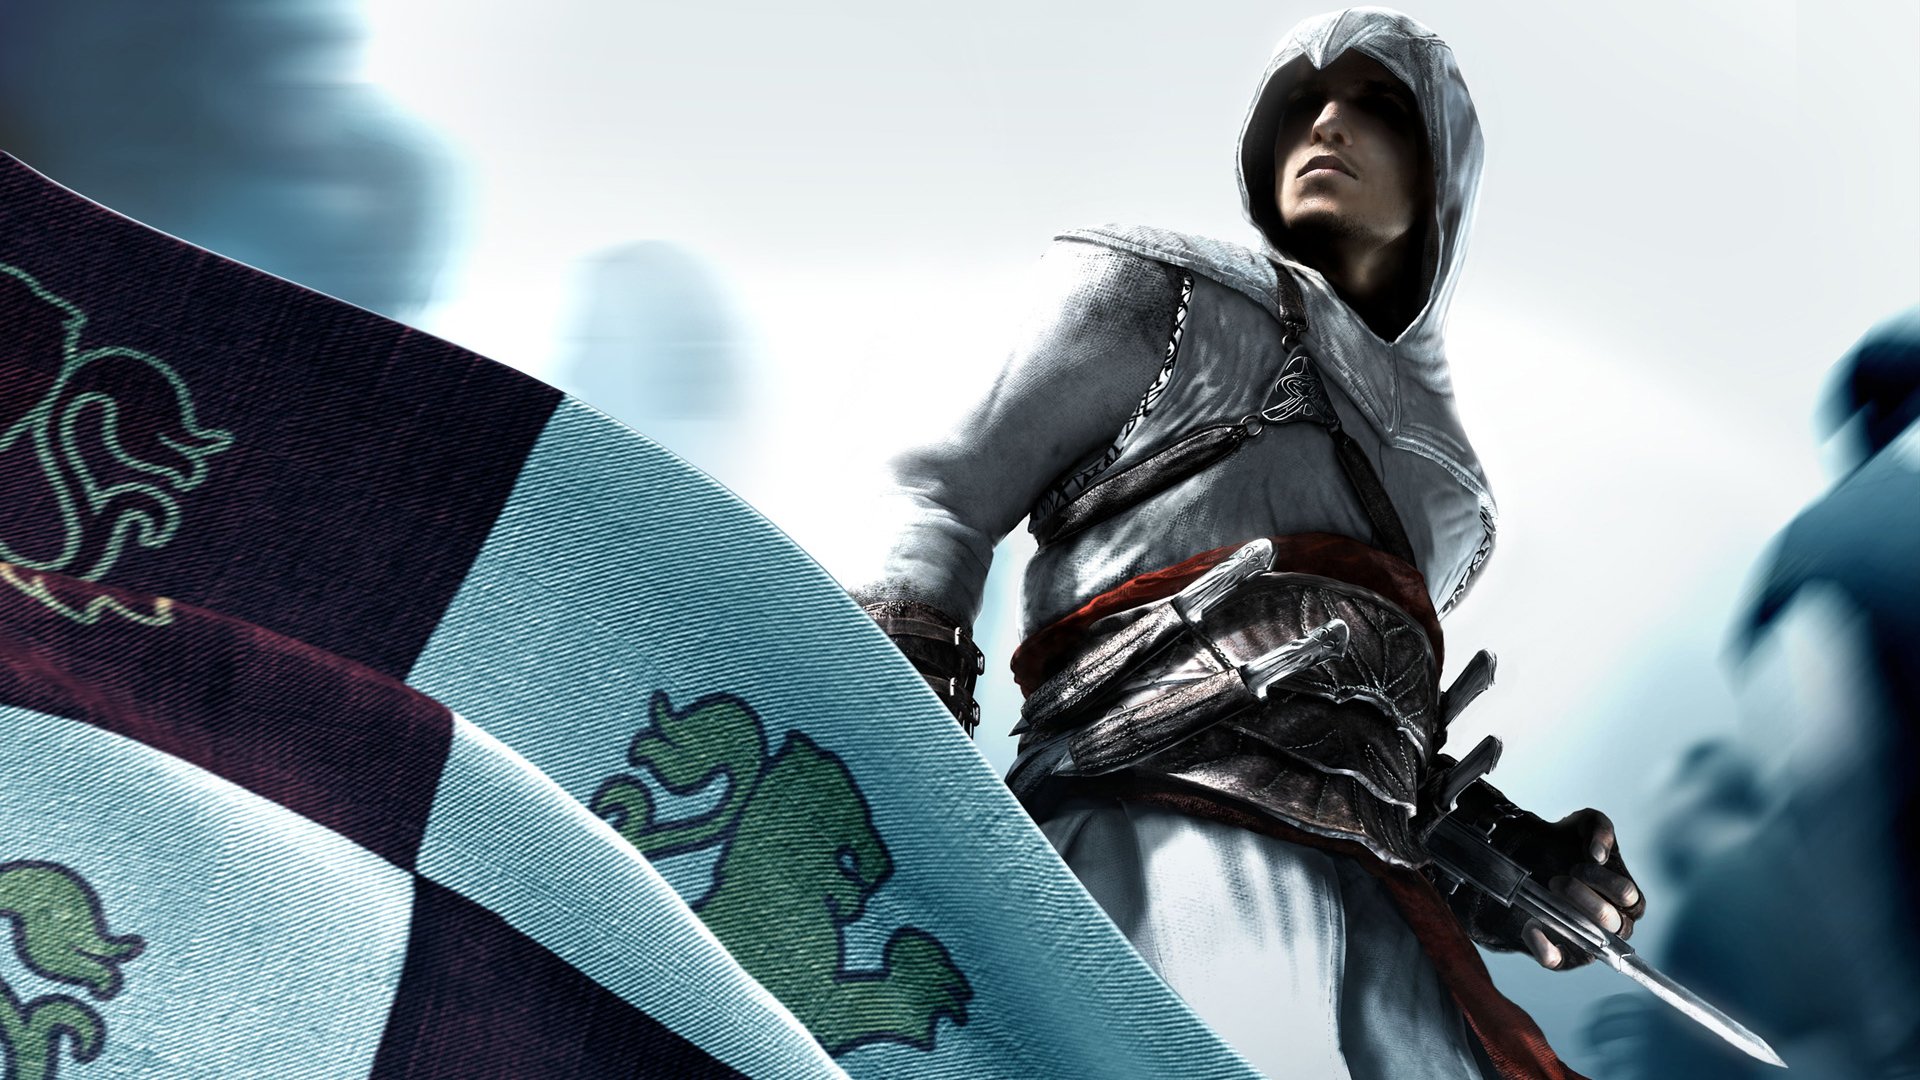 Altair Assassin's Creed